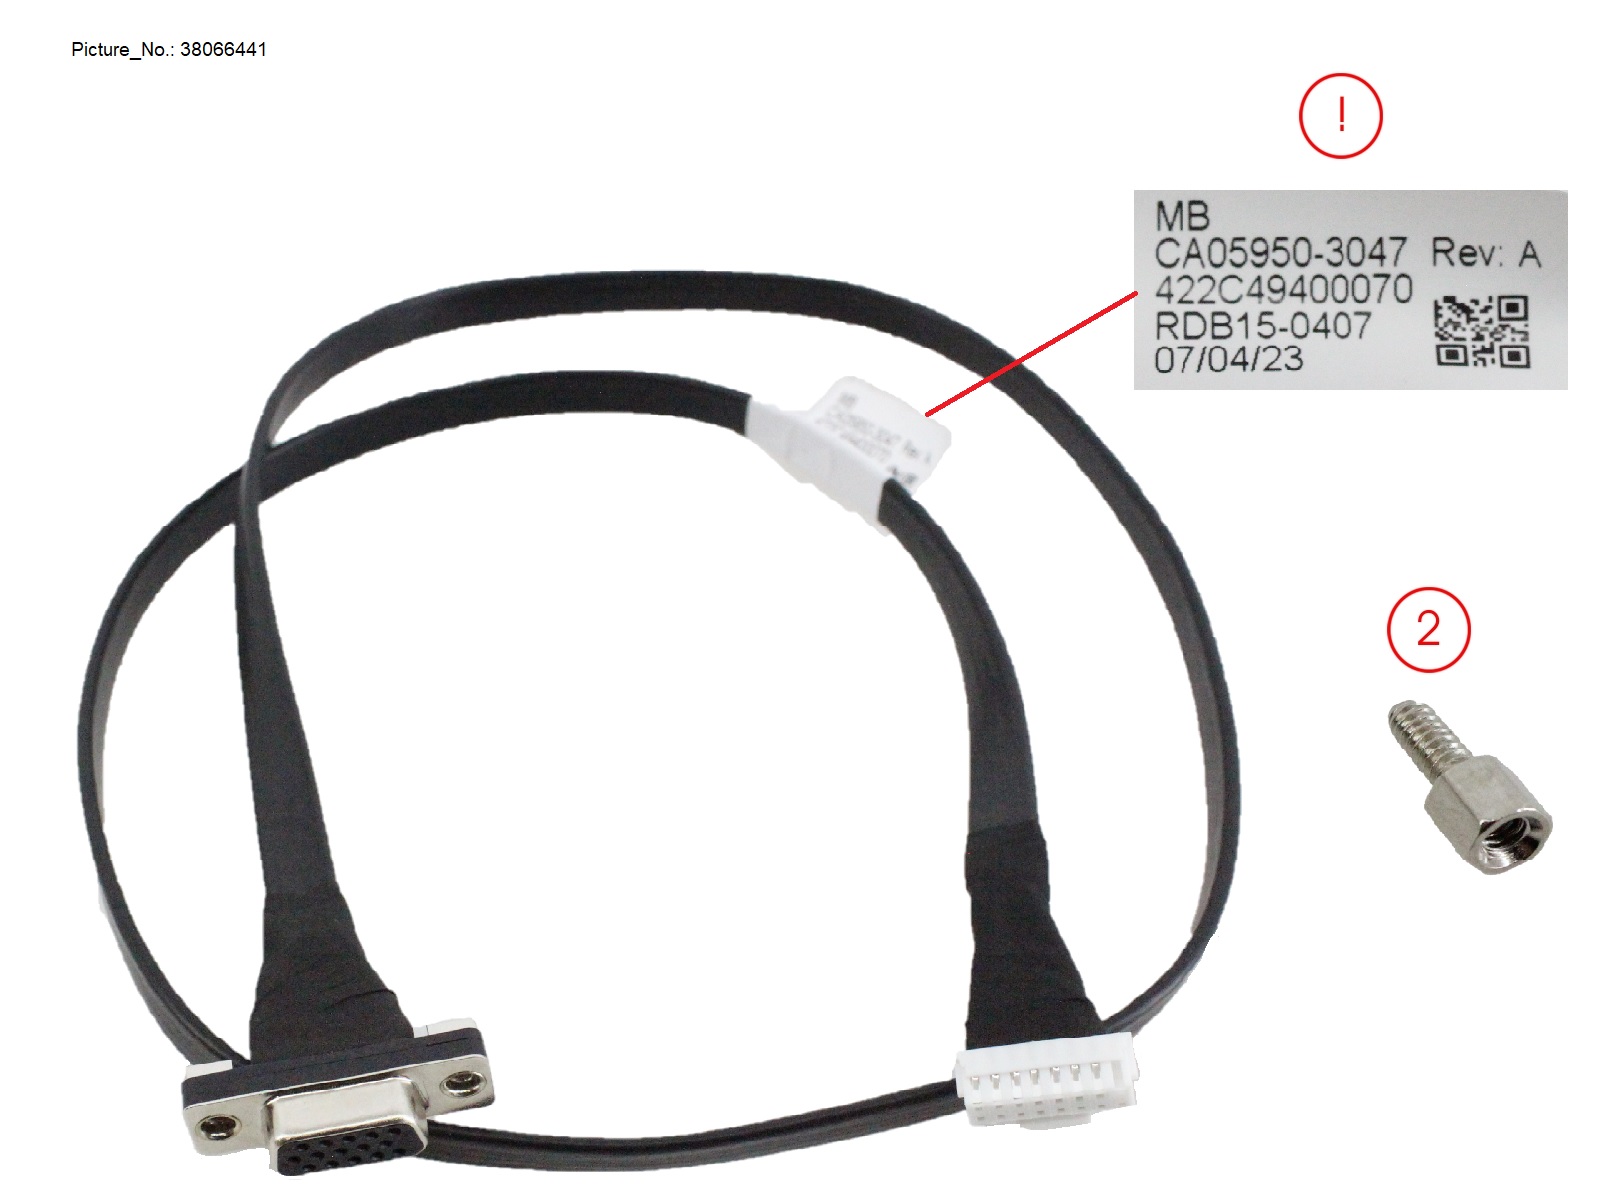 FRONT VGA CABLE